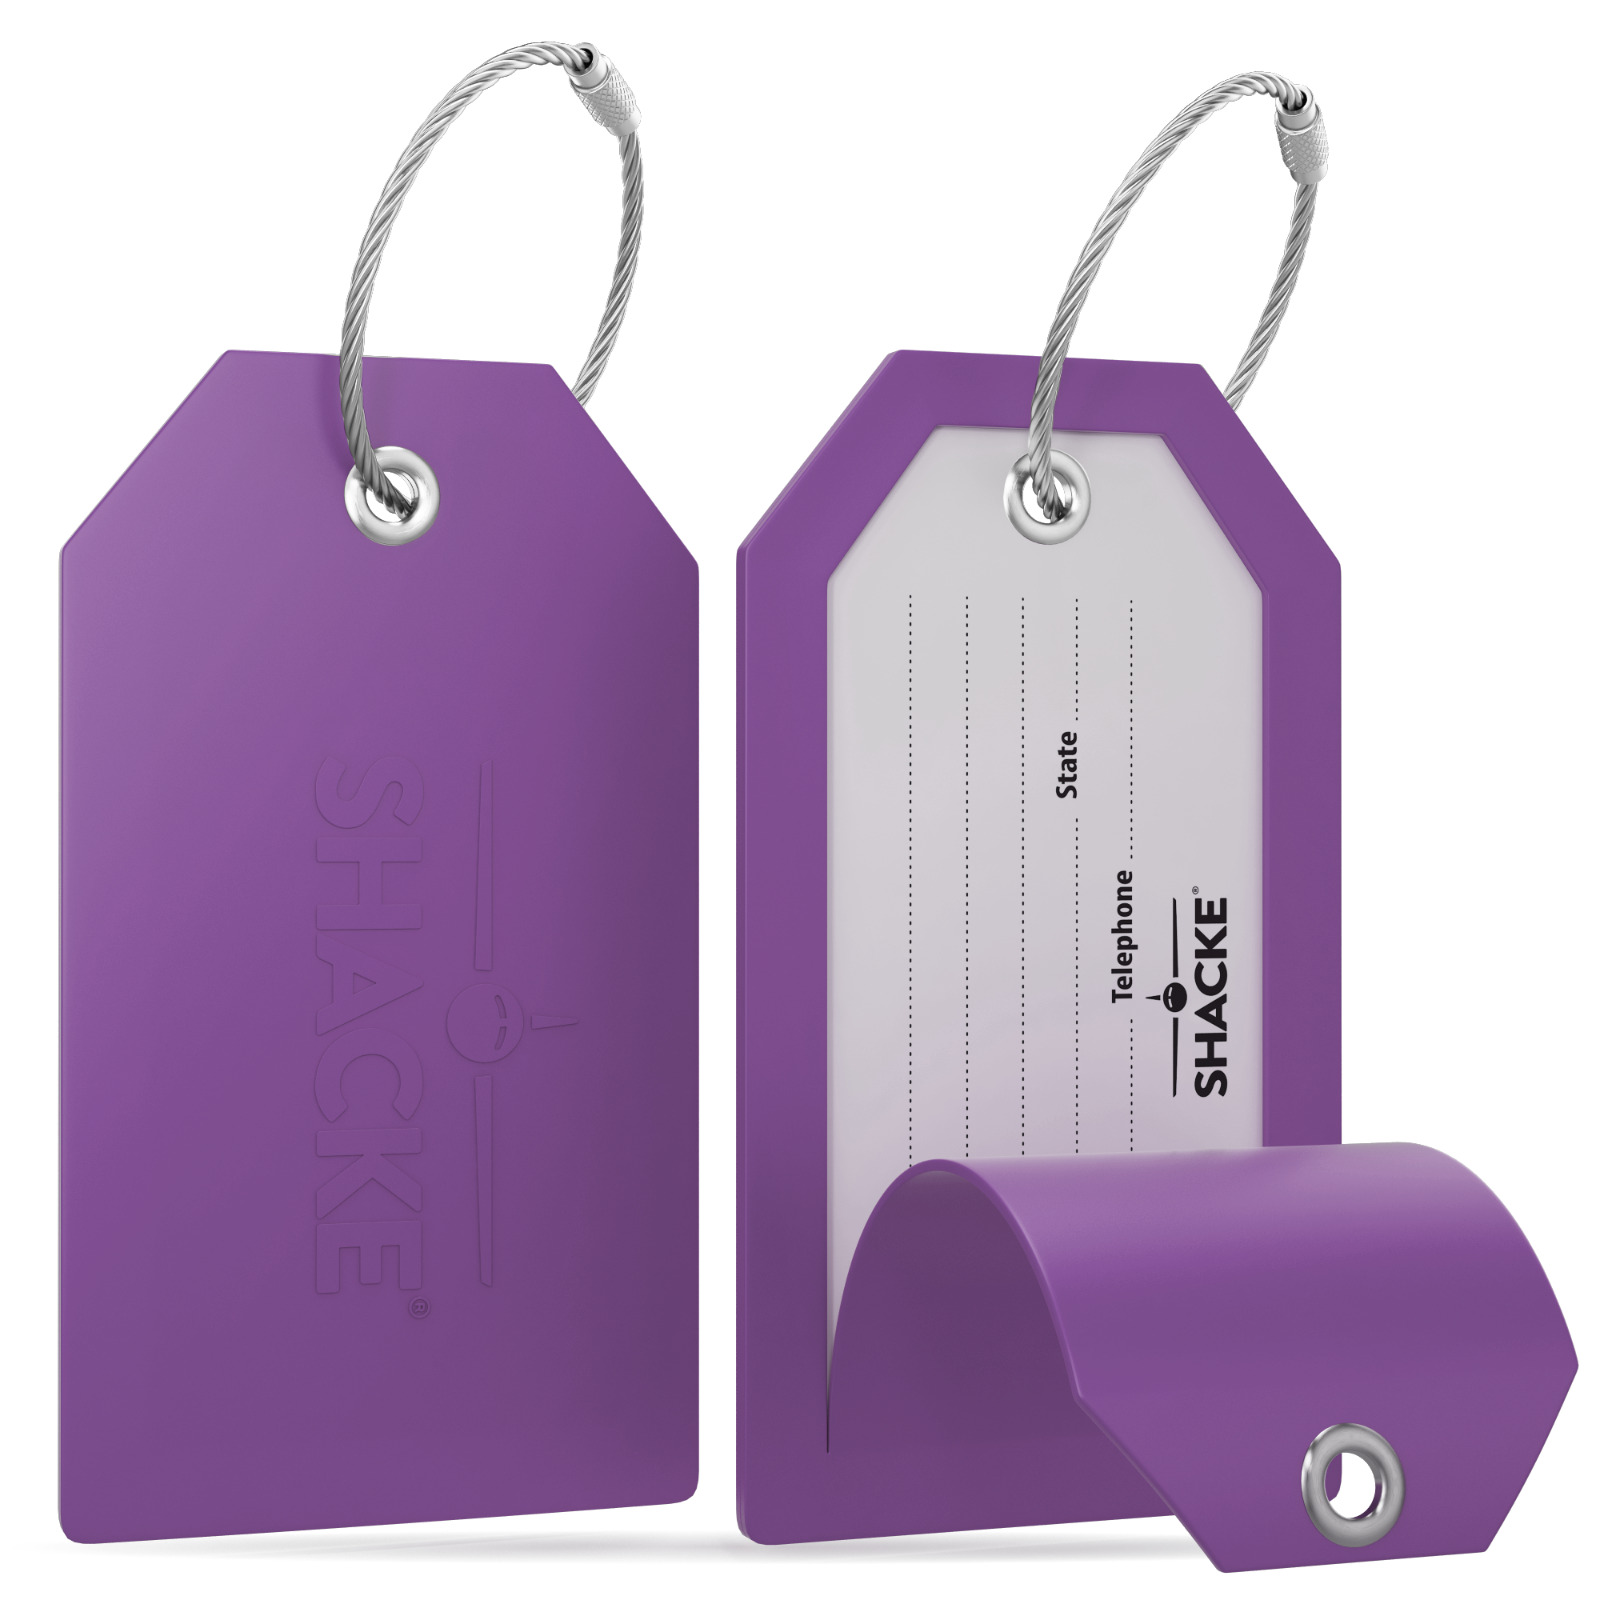 Shacke Privacy Luggage Tags - Set of 2